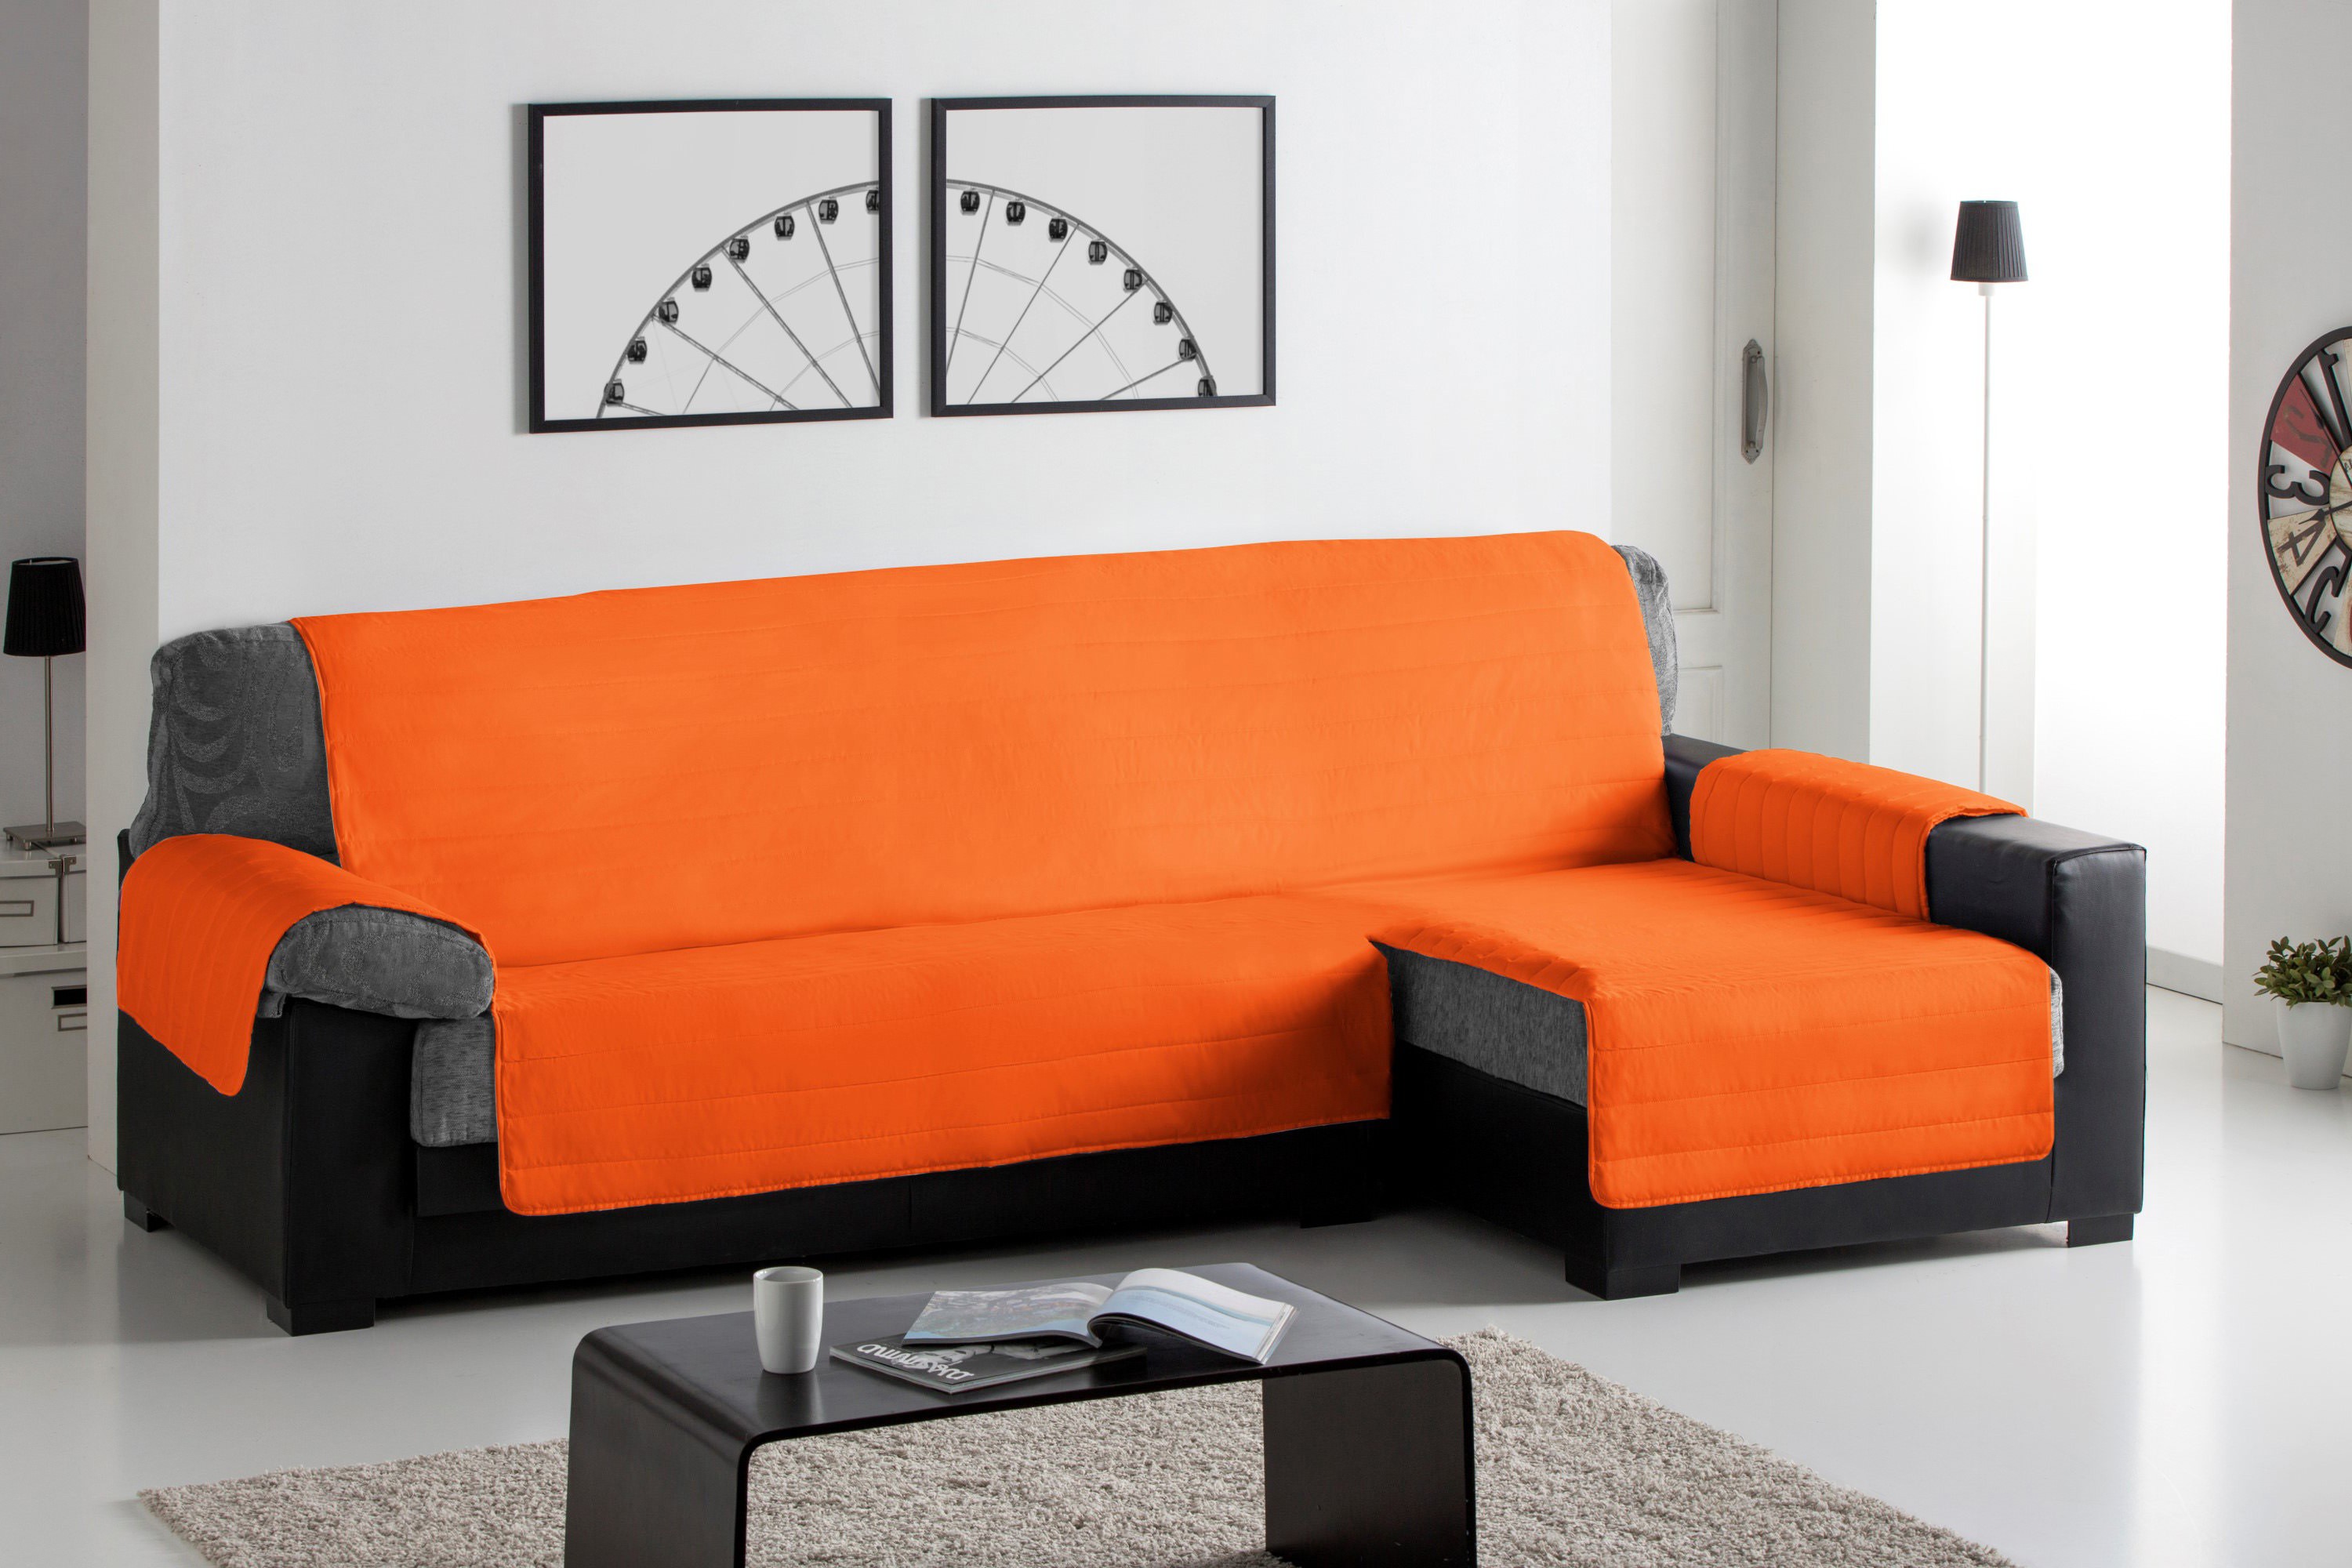 Cubre Sofa Acolchado Chaise Longue Derecho color Naranja, , large image number null